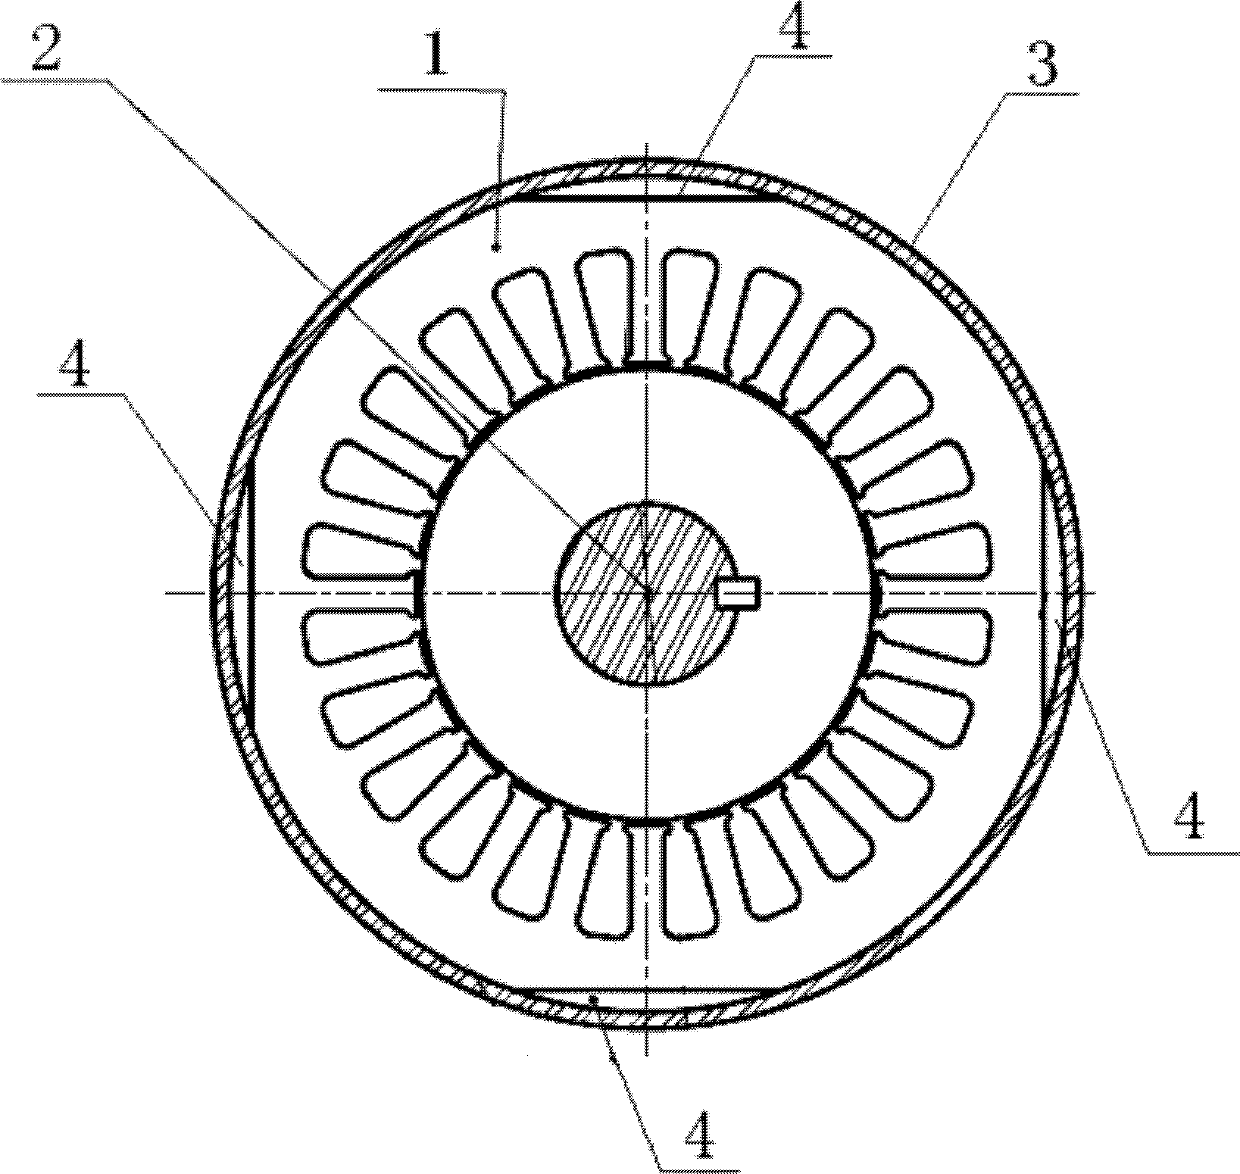 Stator structure of electric compressor